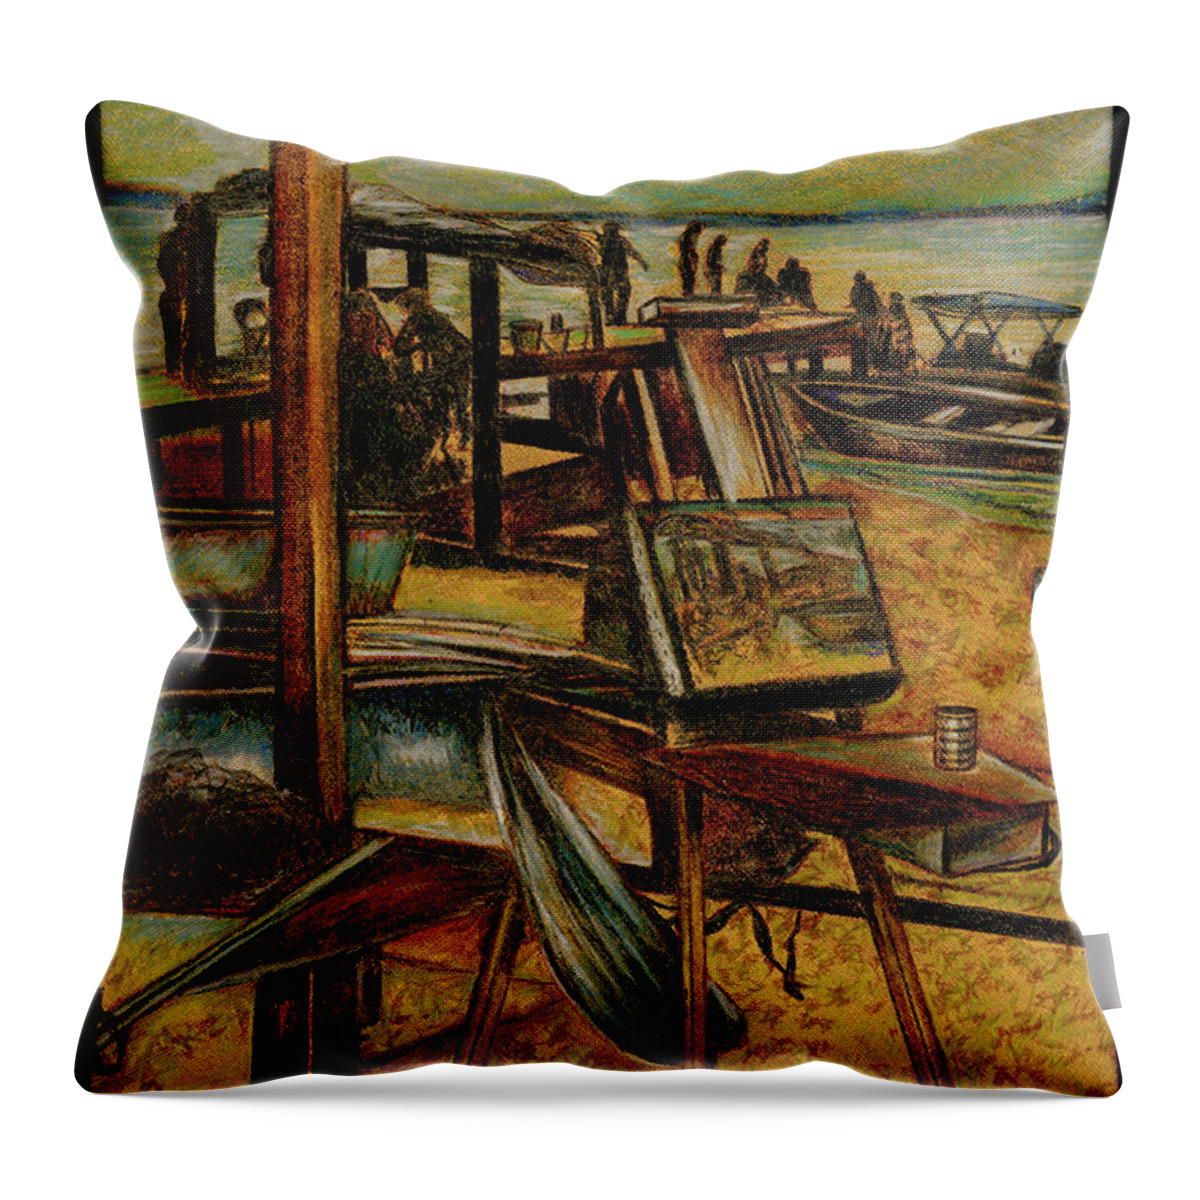 Gaye Elise Beda Throw Pillow featuring the painting All Great Painting starts with one Brush Stoke by Gaye Elise Beda